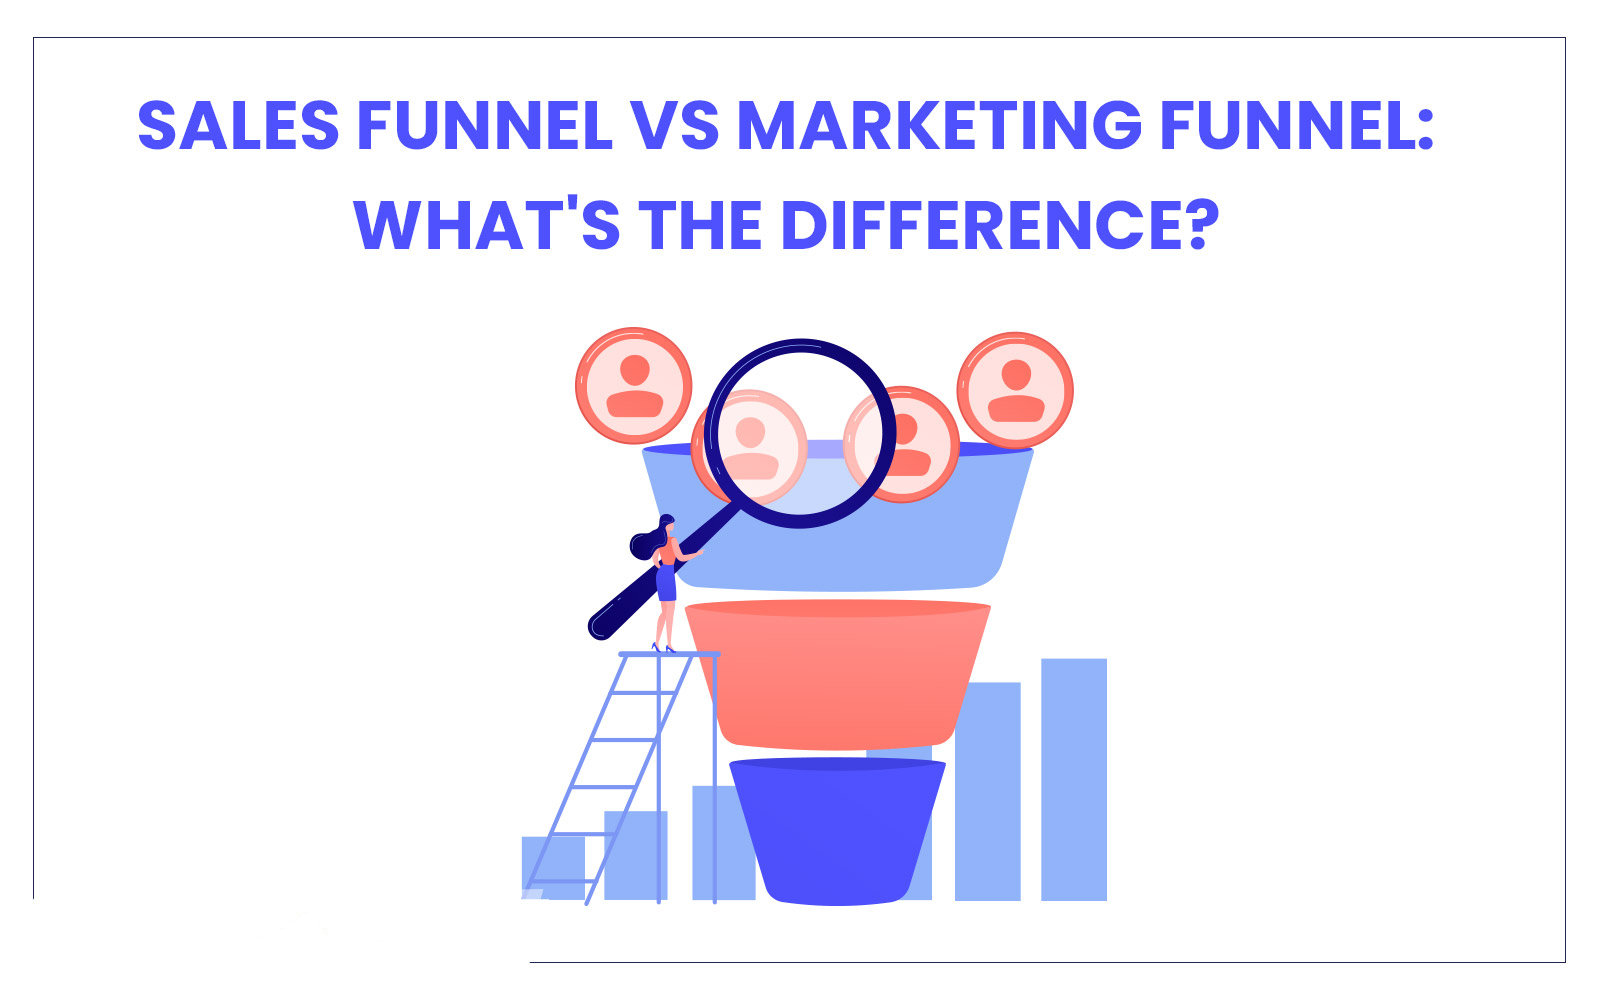 Sales funnel vs Marketing funnel - Whats the difference